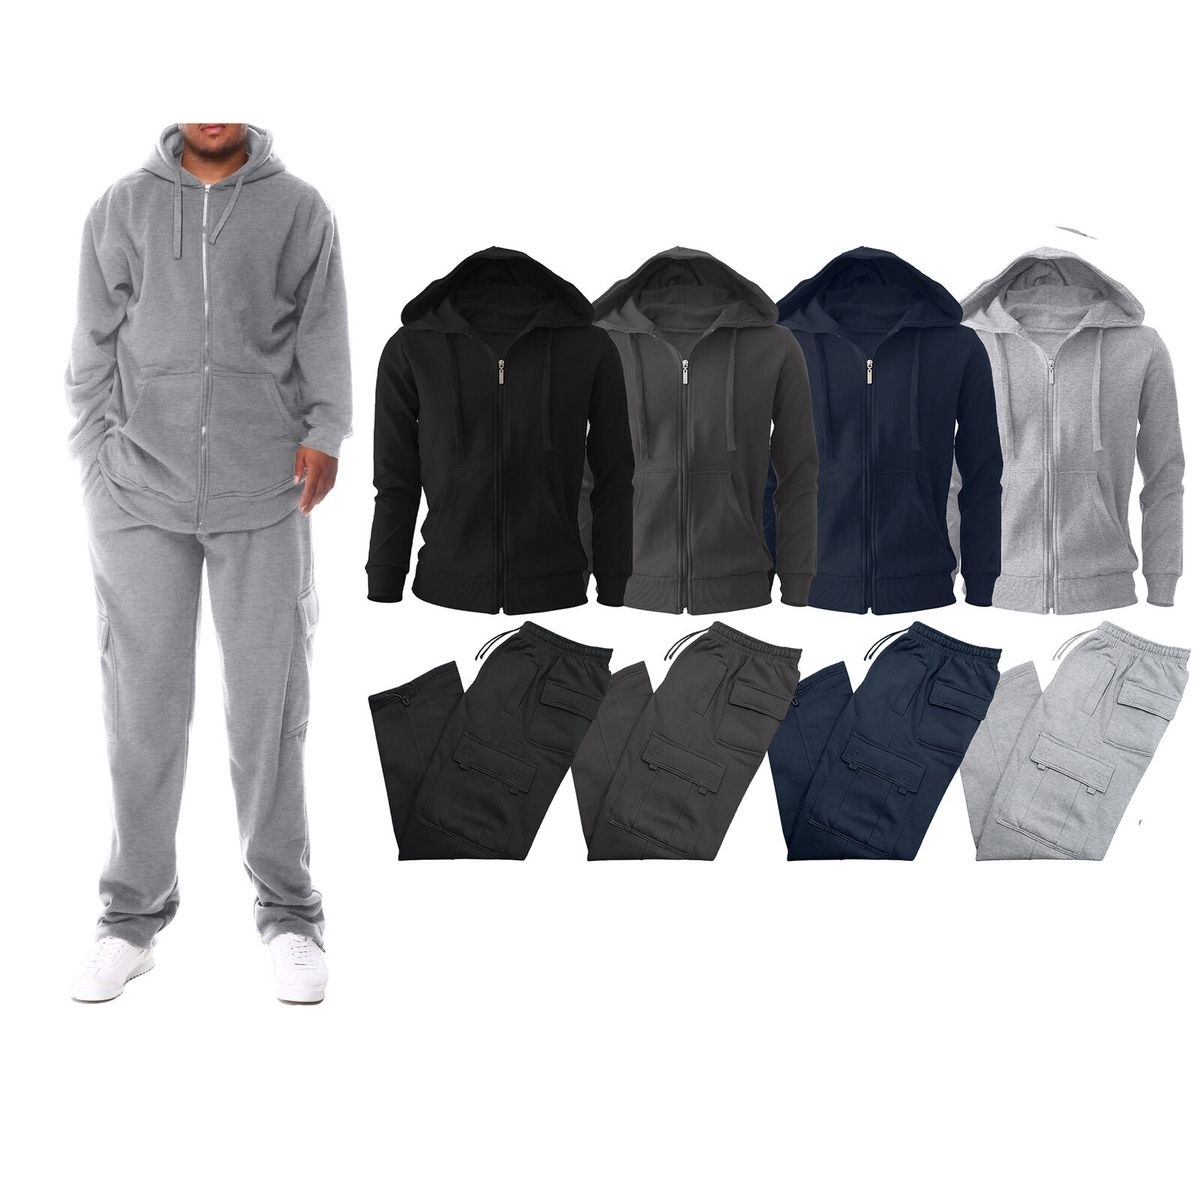 Men's Big & Tall Winter Warm Athletic Active Cozy Fleece Lined Multi-Pocket Full Zip Up Cargo Tracksuit - Grey, Large